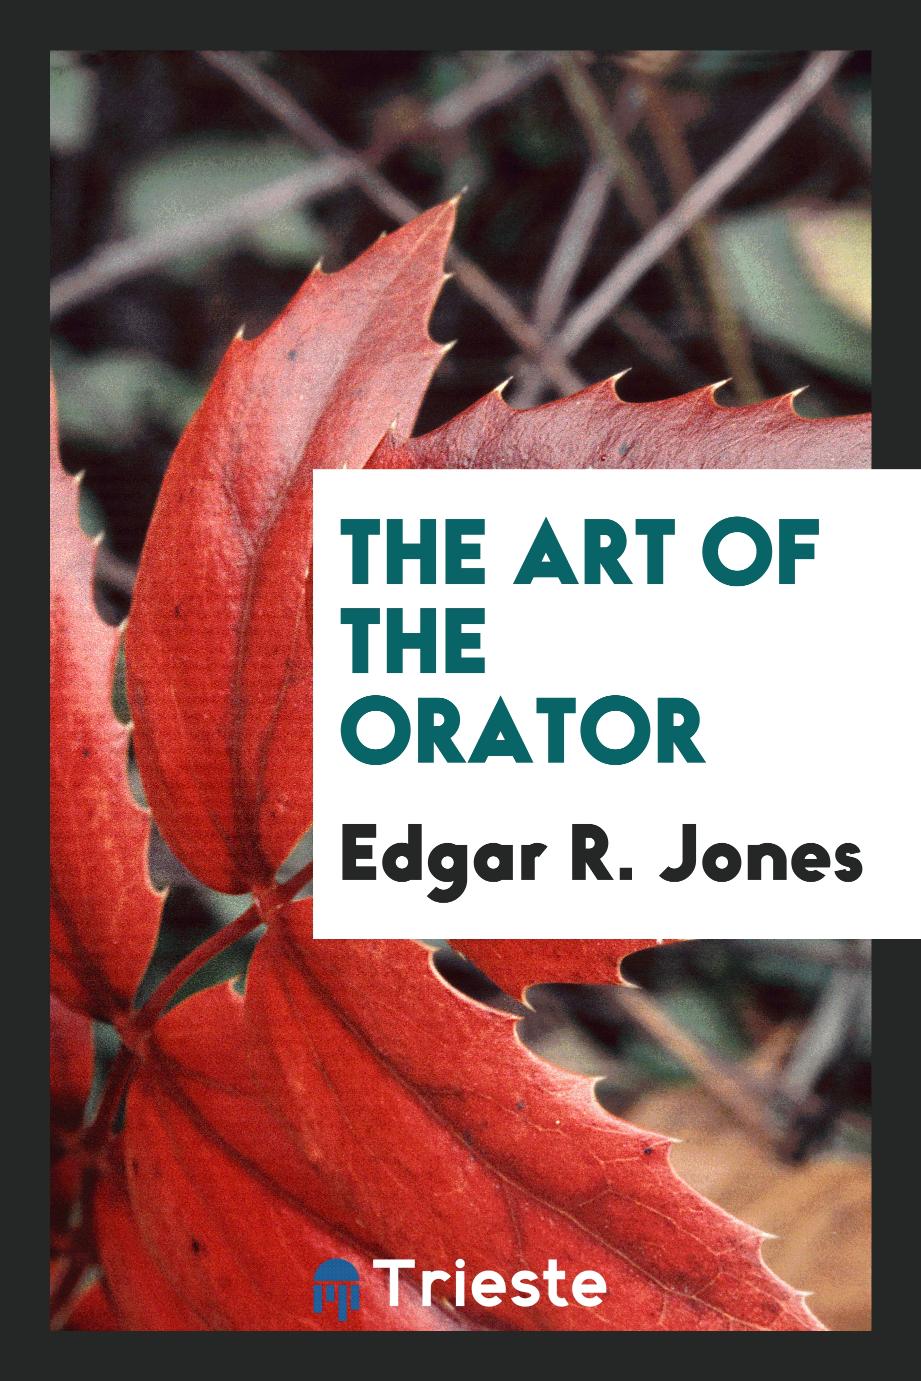 The art of the orator